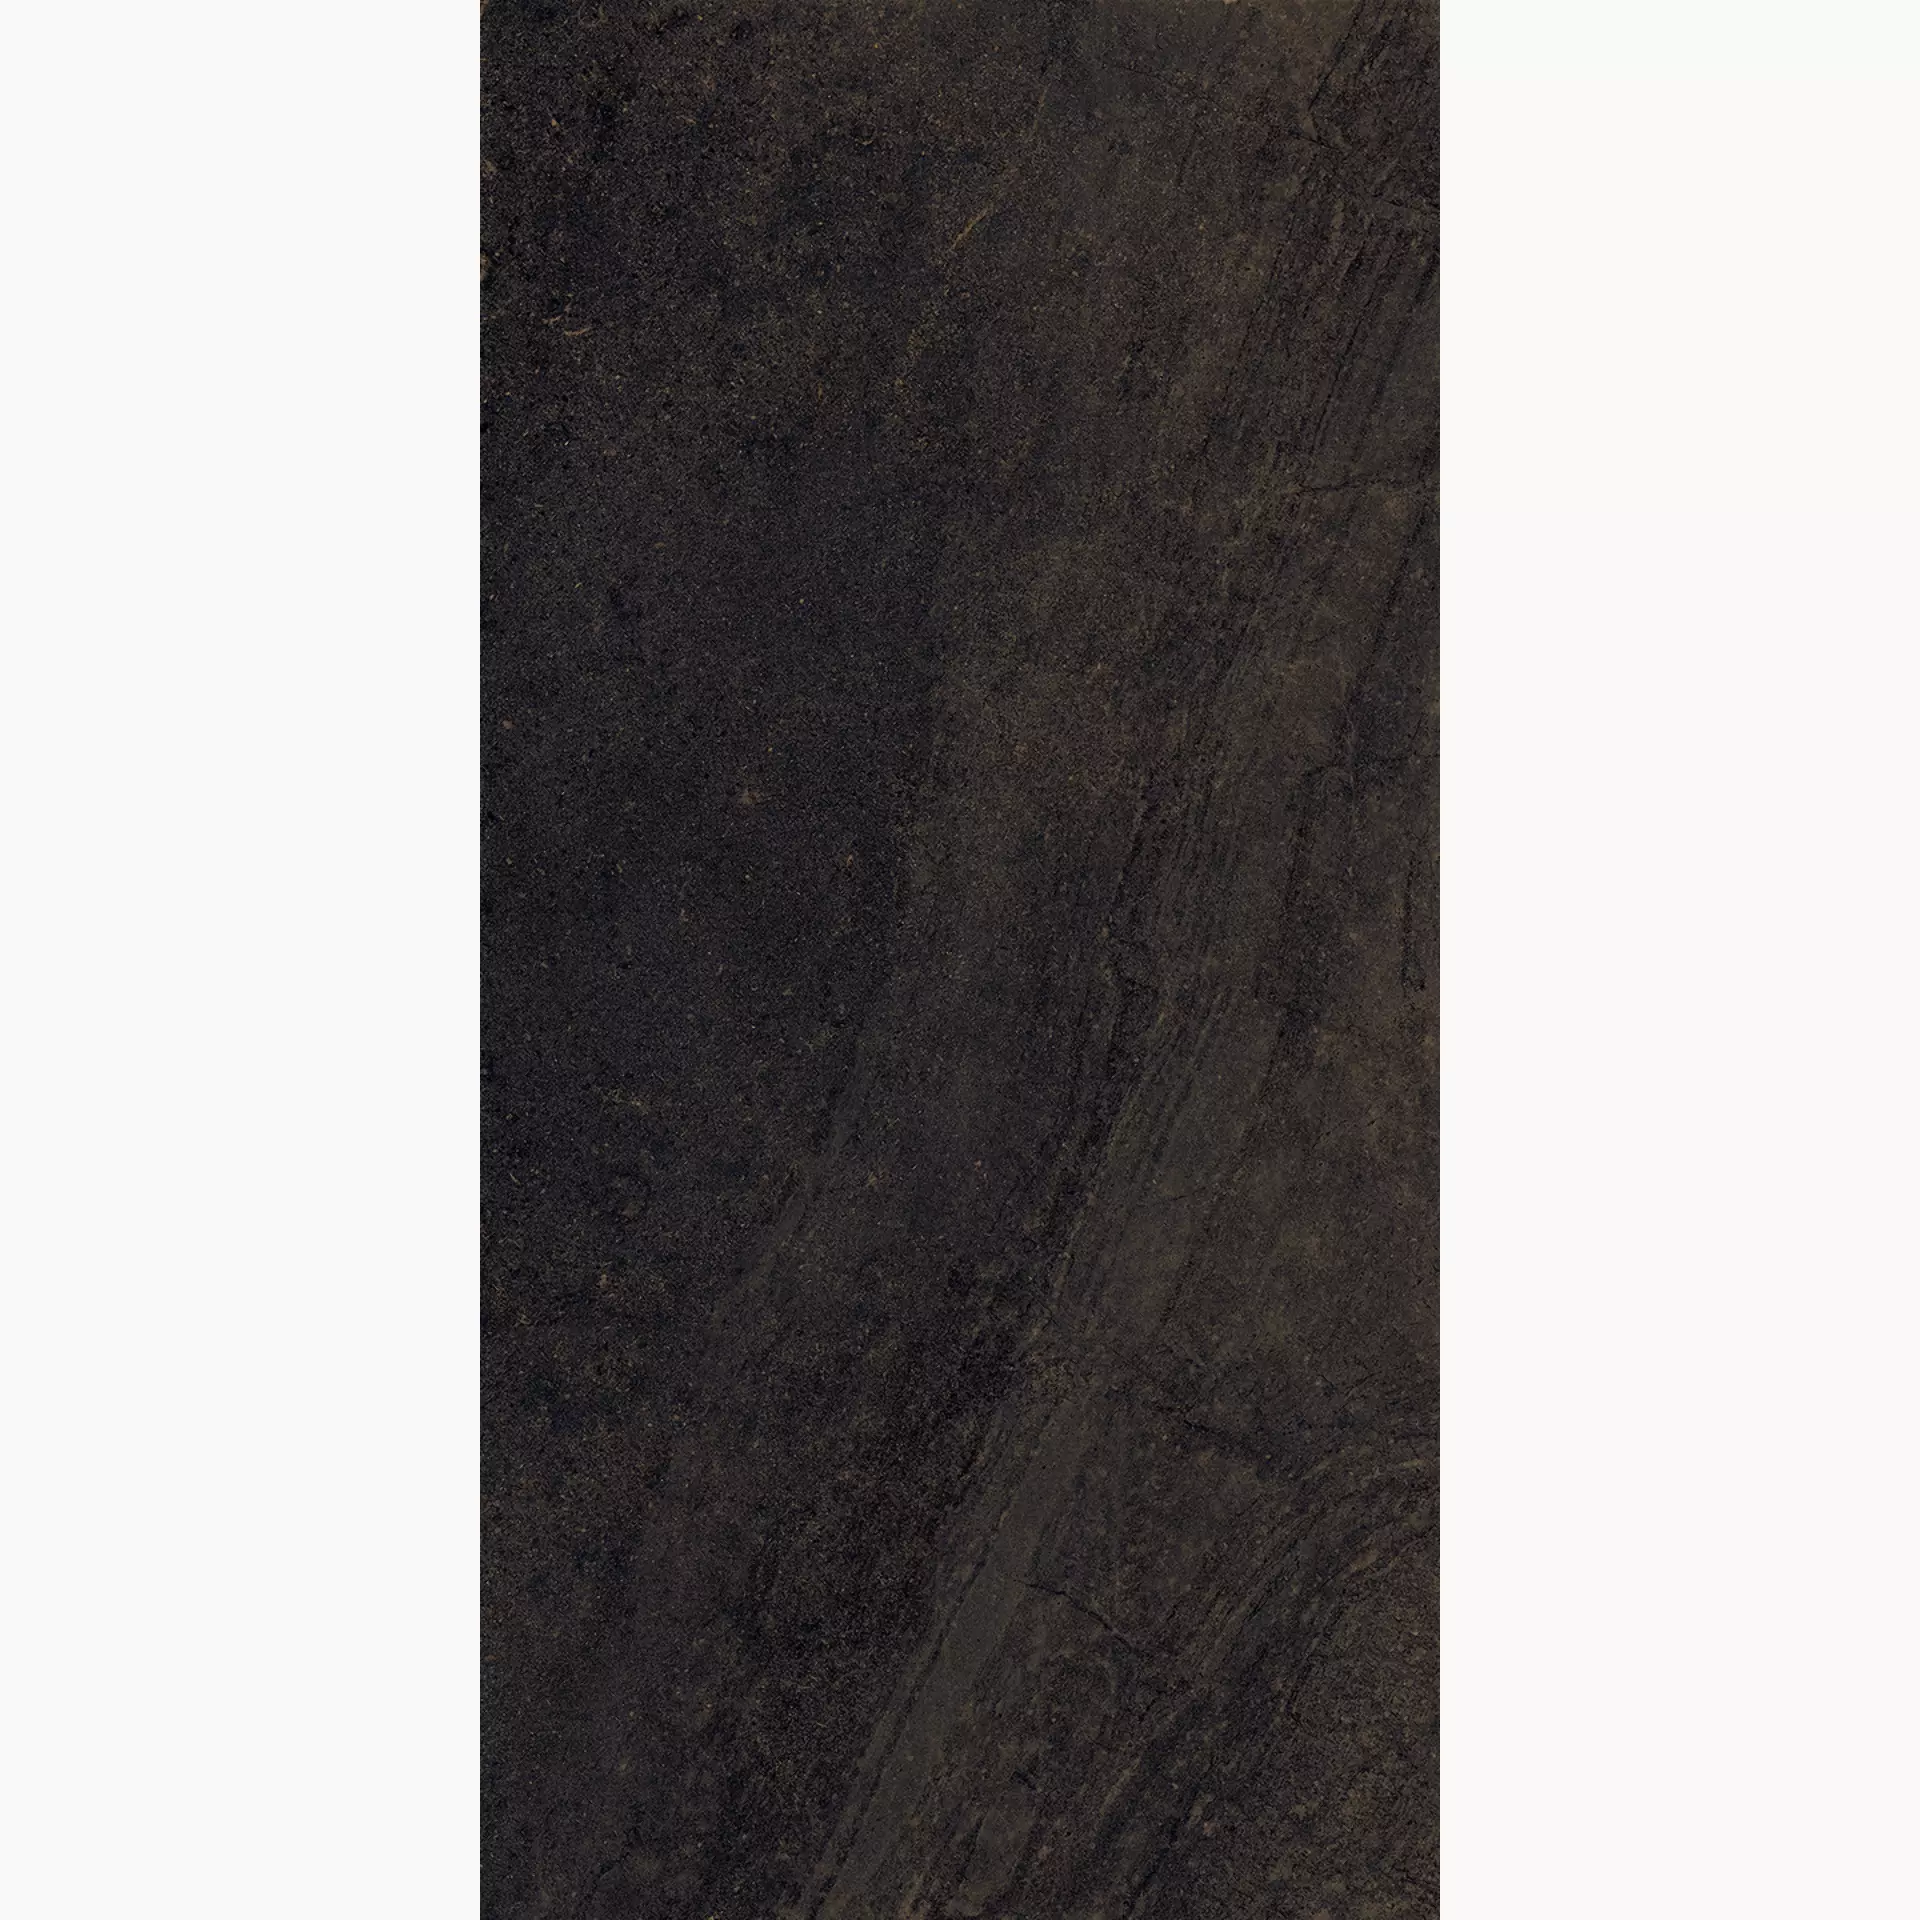 Fondovalle Planeto Pluto Natural PNT271 60x120cm rectified 8,5mm